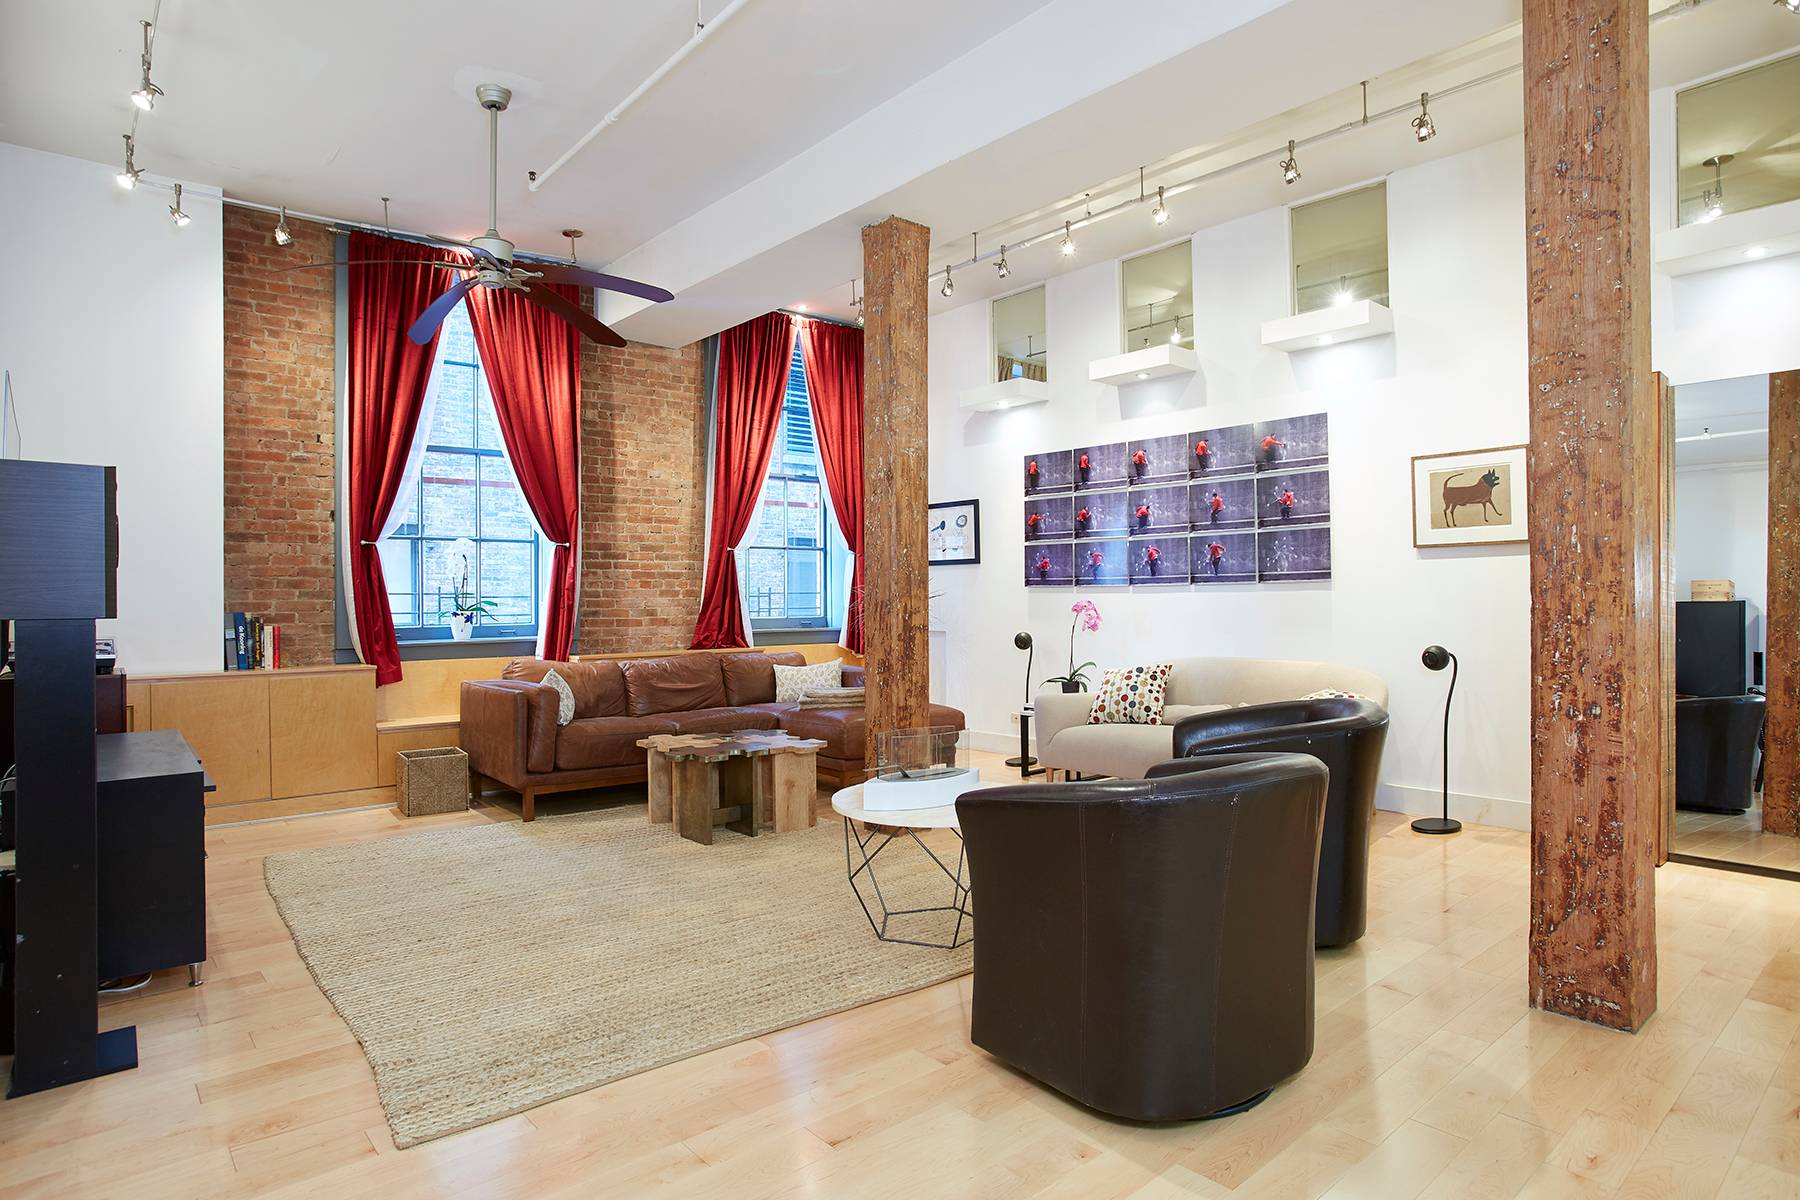 Minutes from Il Buco, Bond Street Sushi and The Bowery Hotel, this renovated loft is perfect for the discerning buyer who wants to live in the heart of the most ...